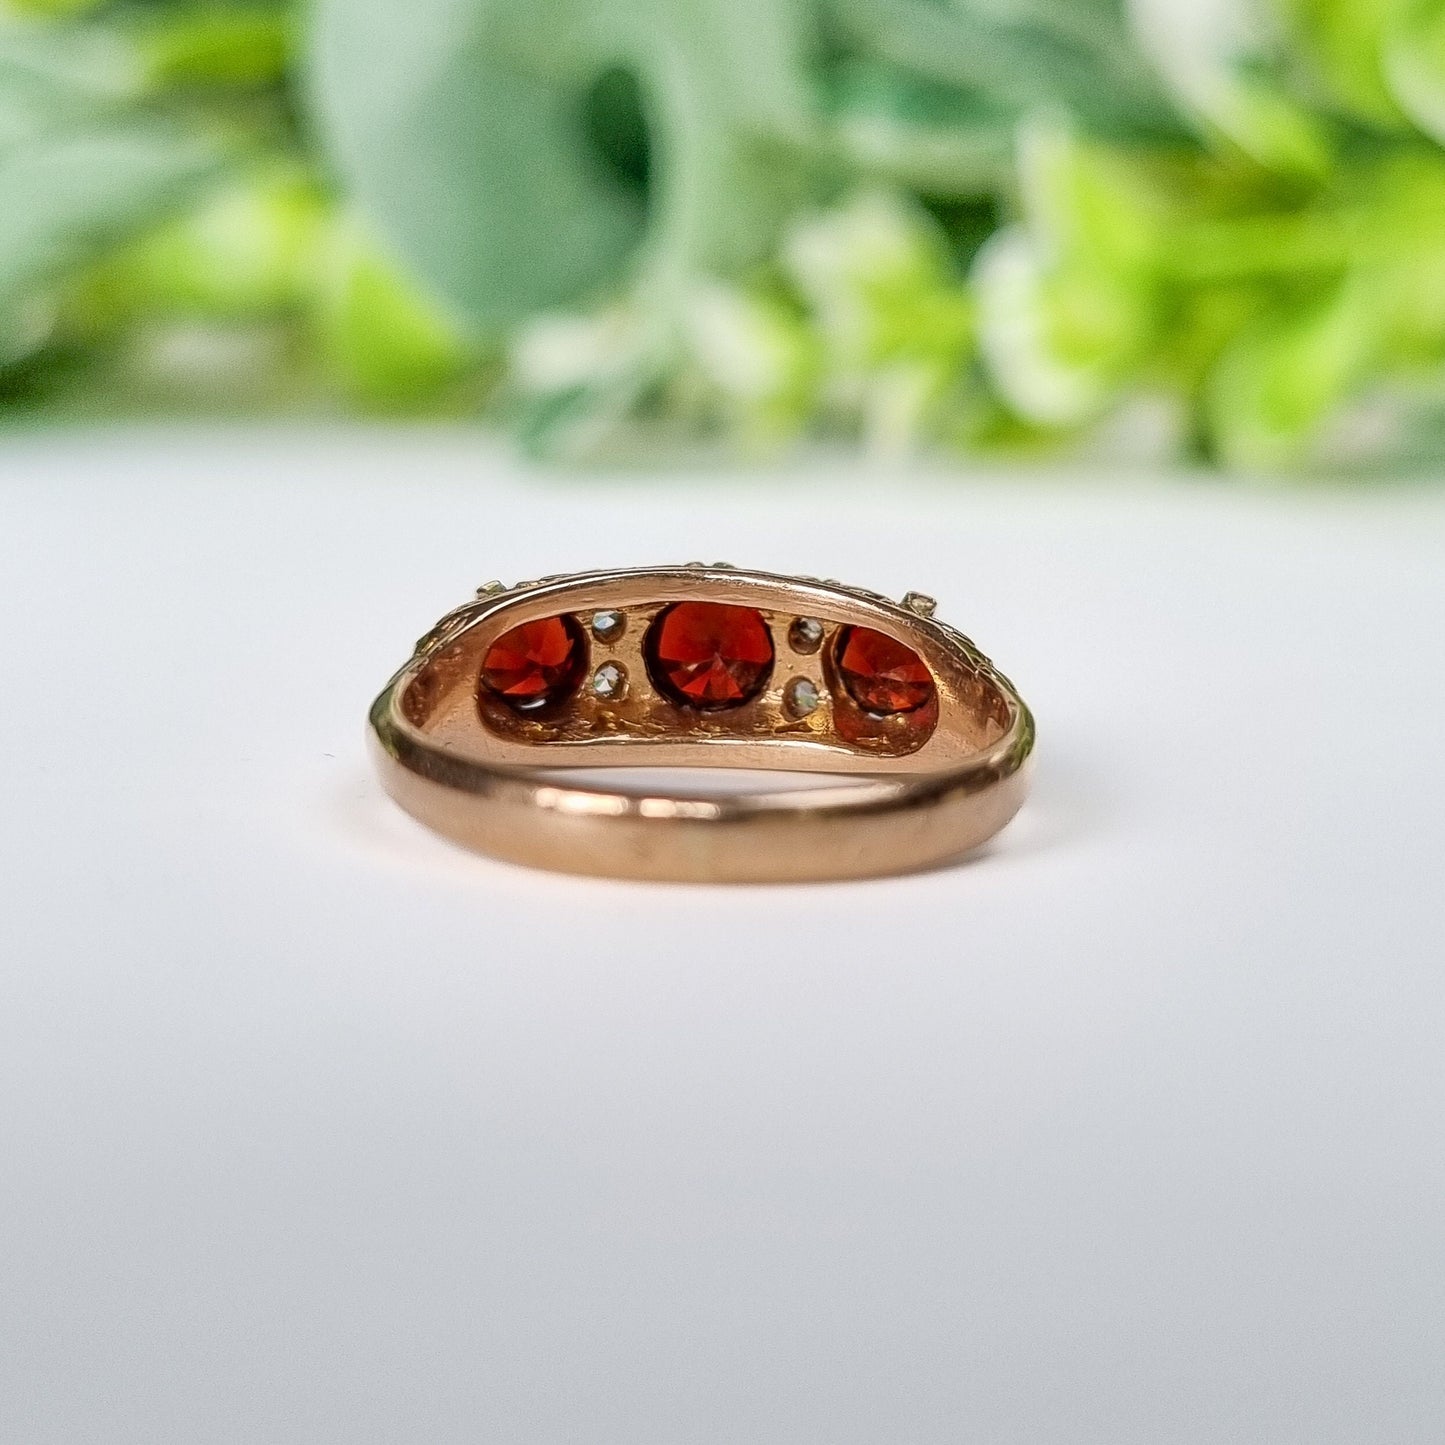 Vintage 9ct Yellow Gold Garnet and White Topaz Ring